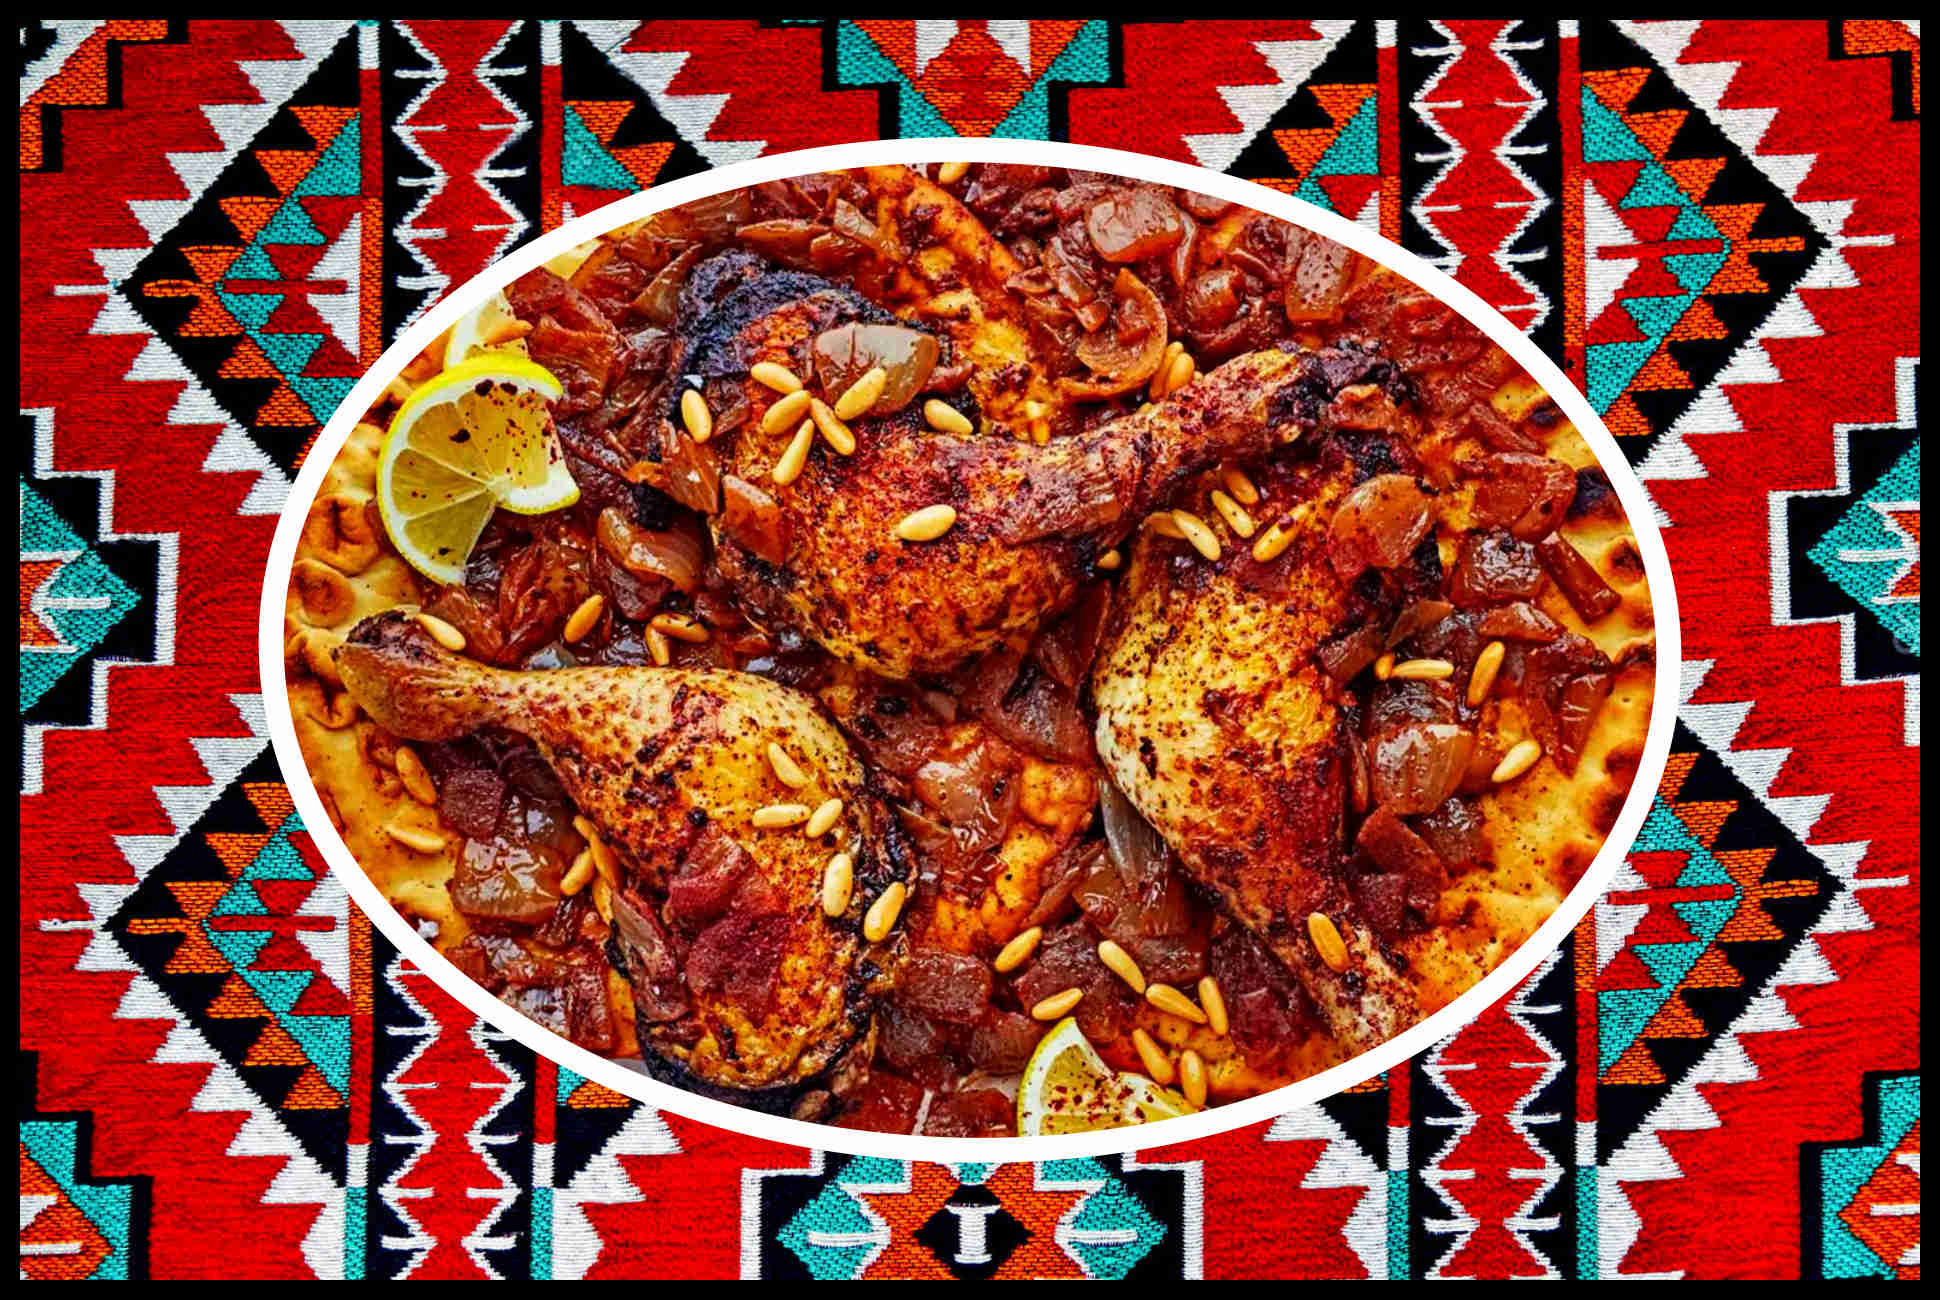 Musakhan Dish; Virgin Olive Oil; Jordanian Culinary Experience; My Mom's Recipe Restaurant; Petra Dining; Sumac-seasoned Chicken; Caramelized Onions; Traditional Bread; Culinary Heritage; Petra Gastronomy; Olive Oil Infusion; Ancient Flavors; Petra Cuisine; Culinary Artistry; Savory Sumac Chicken; Olive Oil Elegance; Gastronomic Excellence; Petra Food Adventure; Heritage-infused Dining; Olive Oil-Enriched Musakhan.